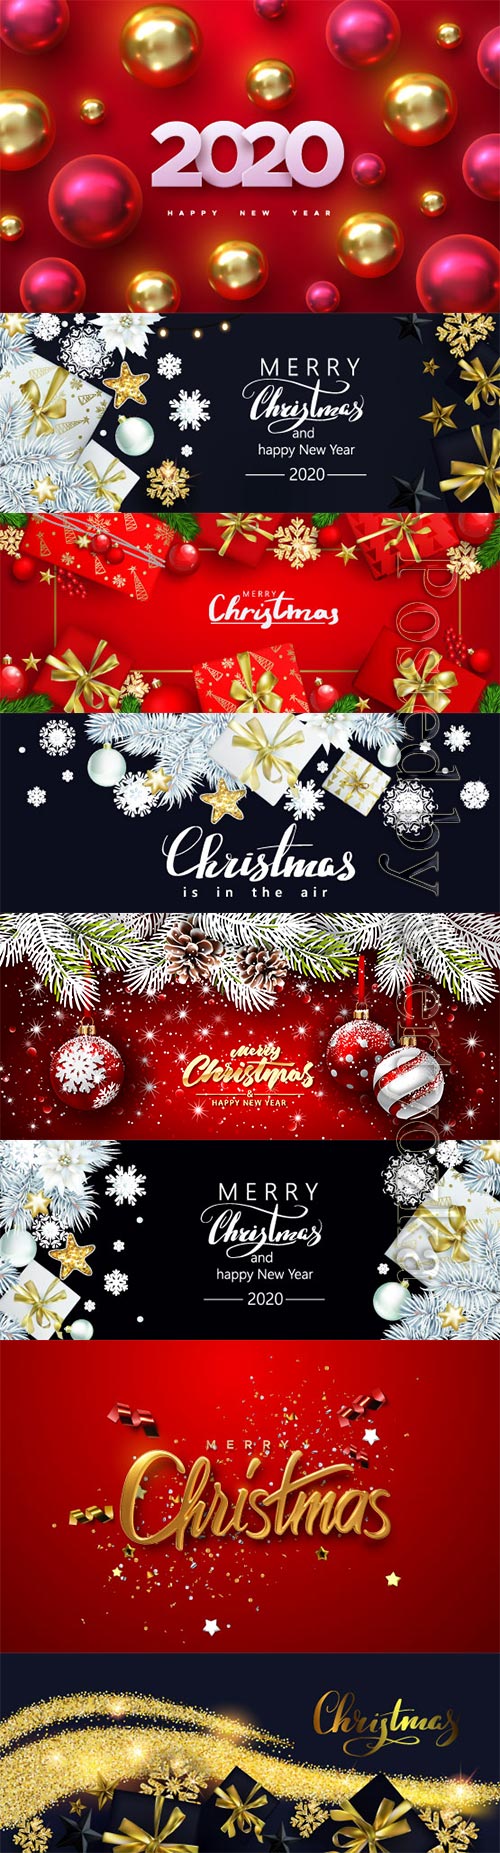 Christmas banner with gift boxes and golden snowflakes